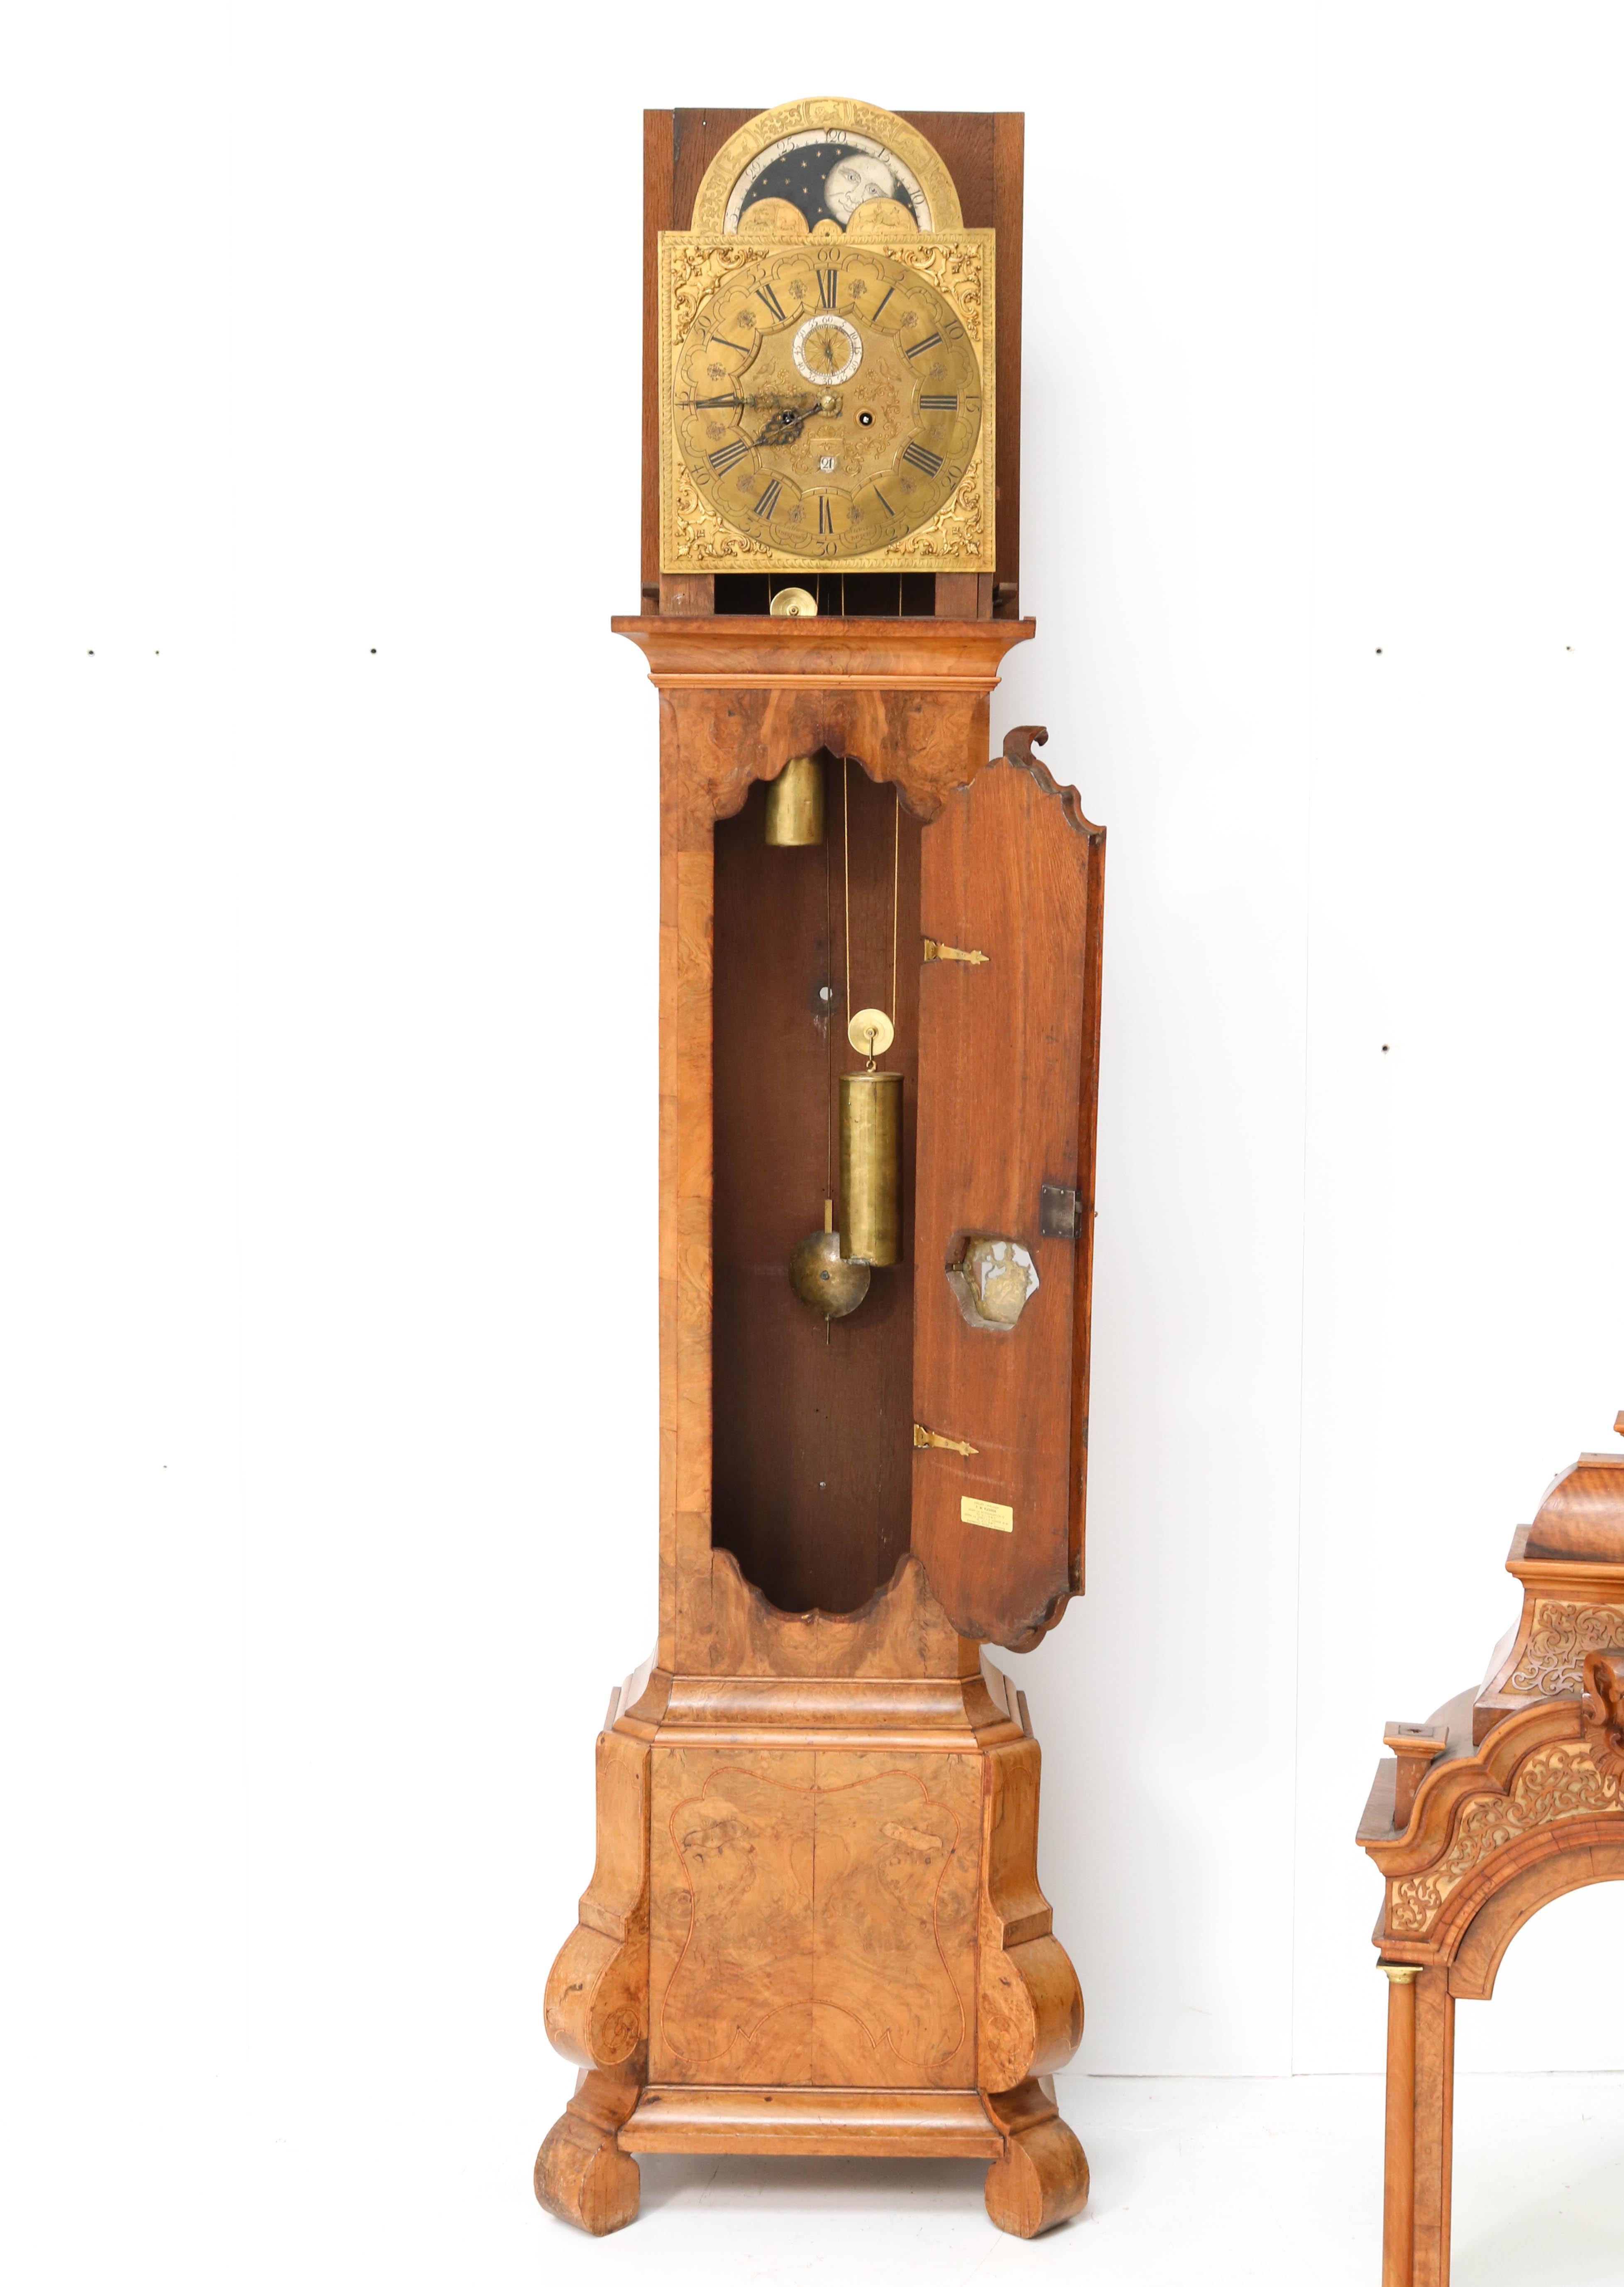 Dutch 18th Century Walnut Longcase or Grandfather Clock by Anthony Auwers For Sale 9